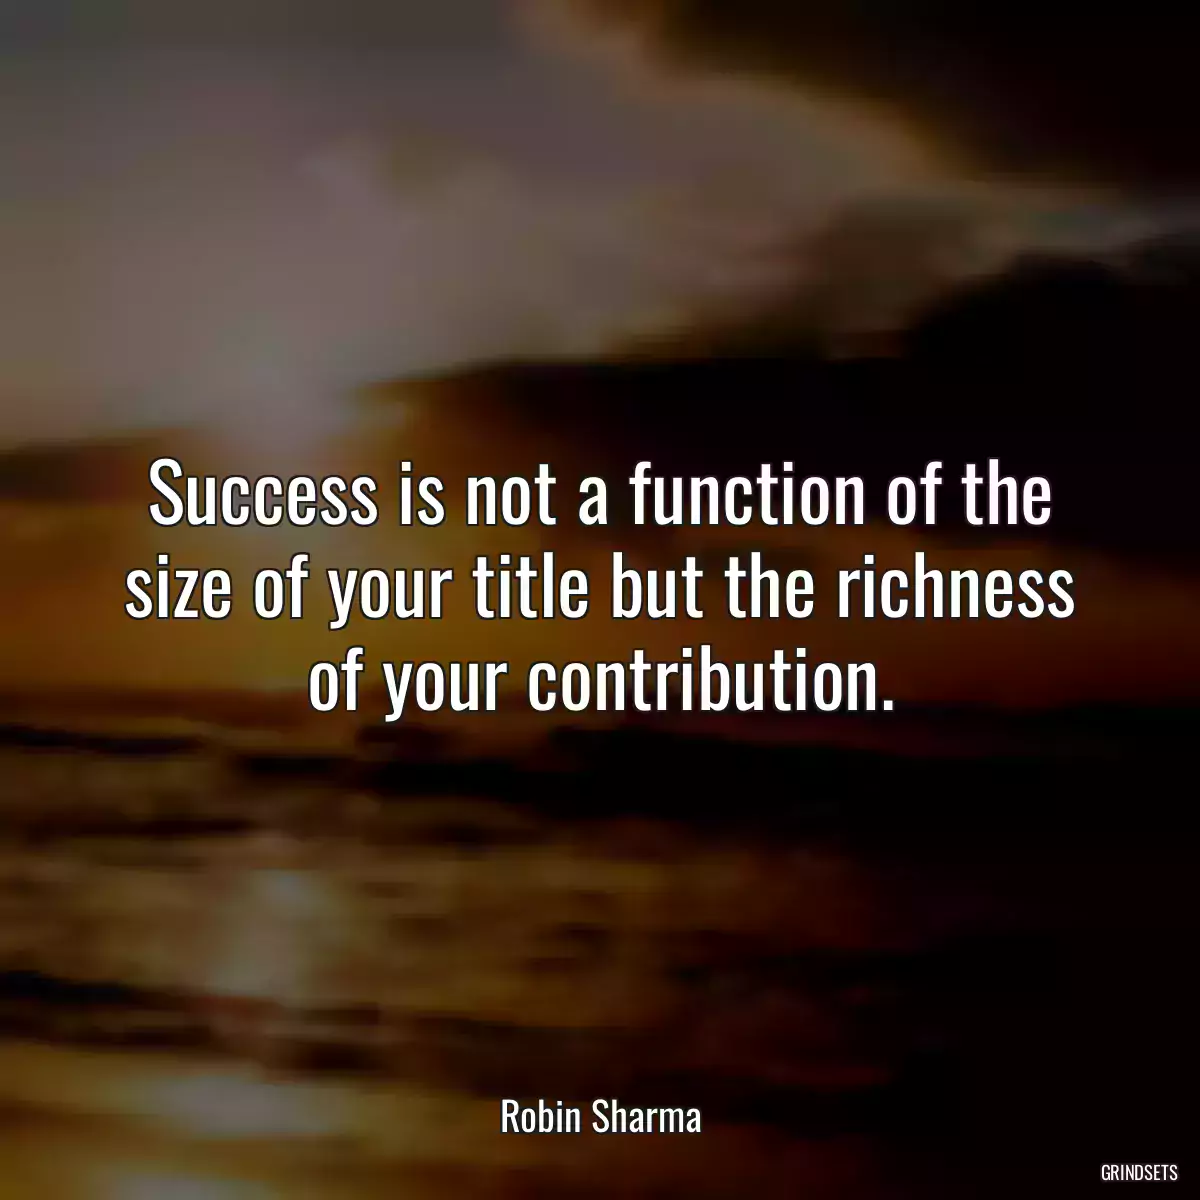 Success is not a function of the size of your title but the richness of your contribution.